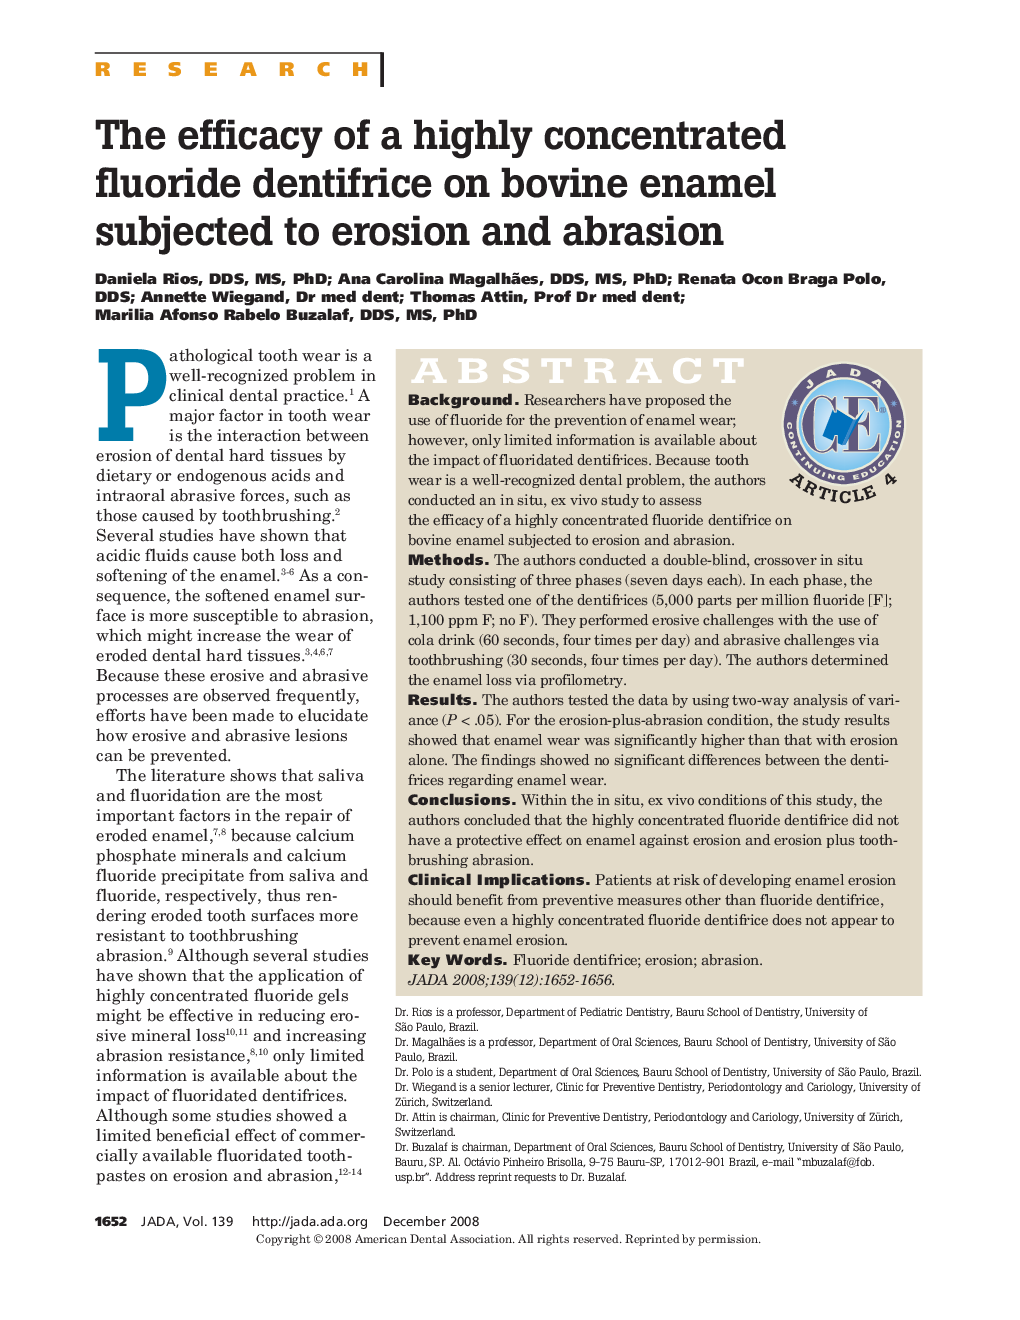 The efficacy of a highly concentrated fluoride dentifrice on bovine enamel subjected to erosion and abrasion